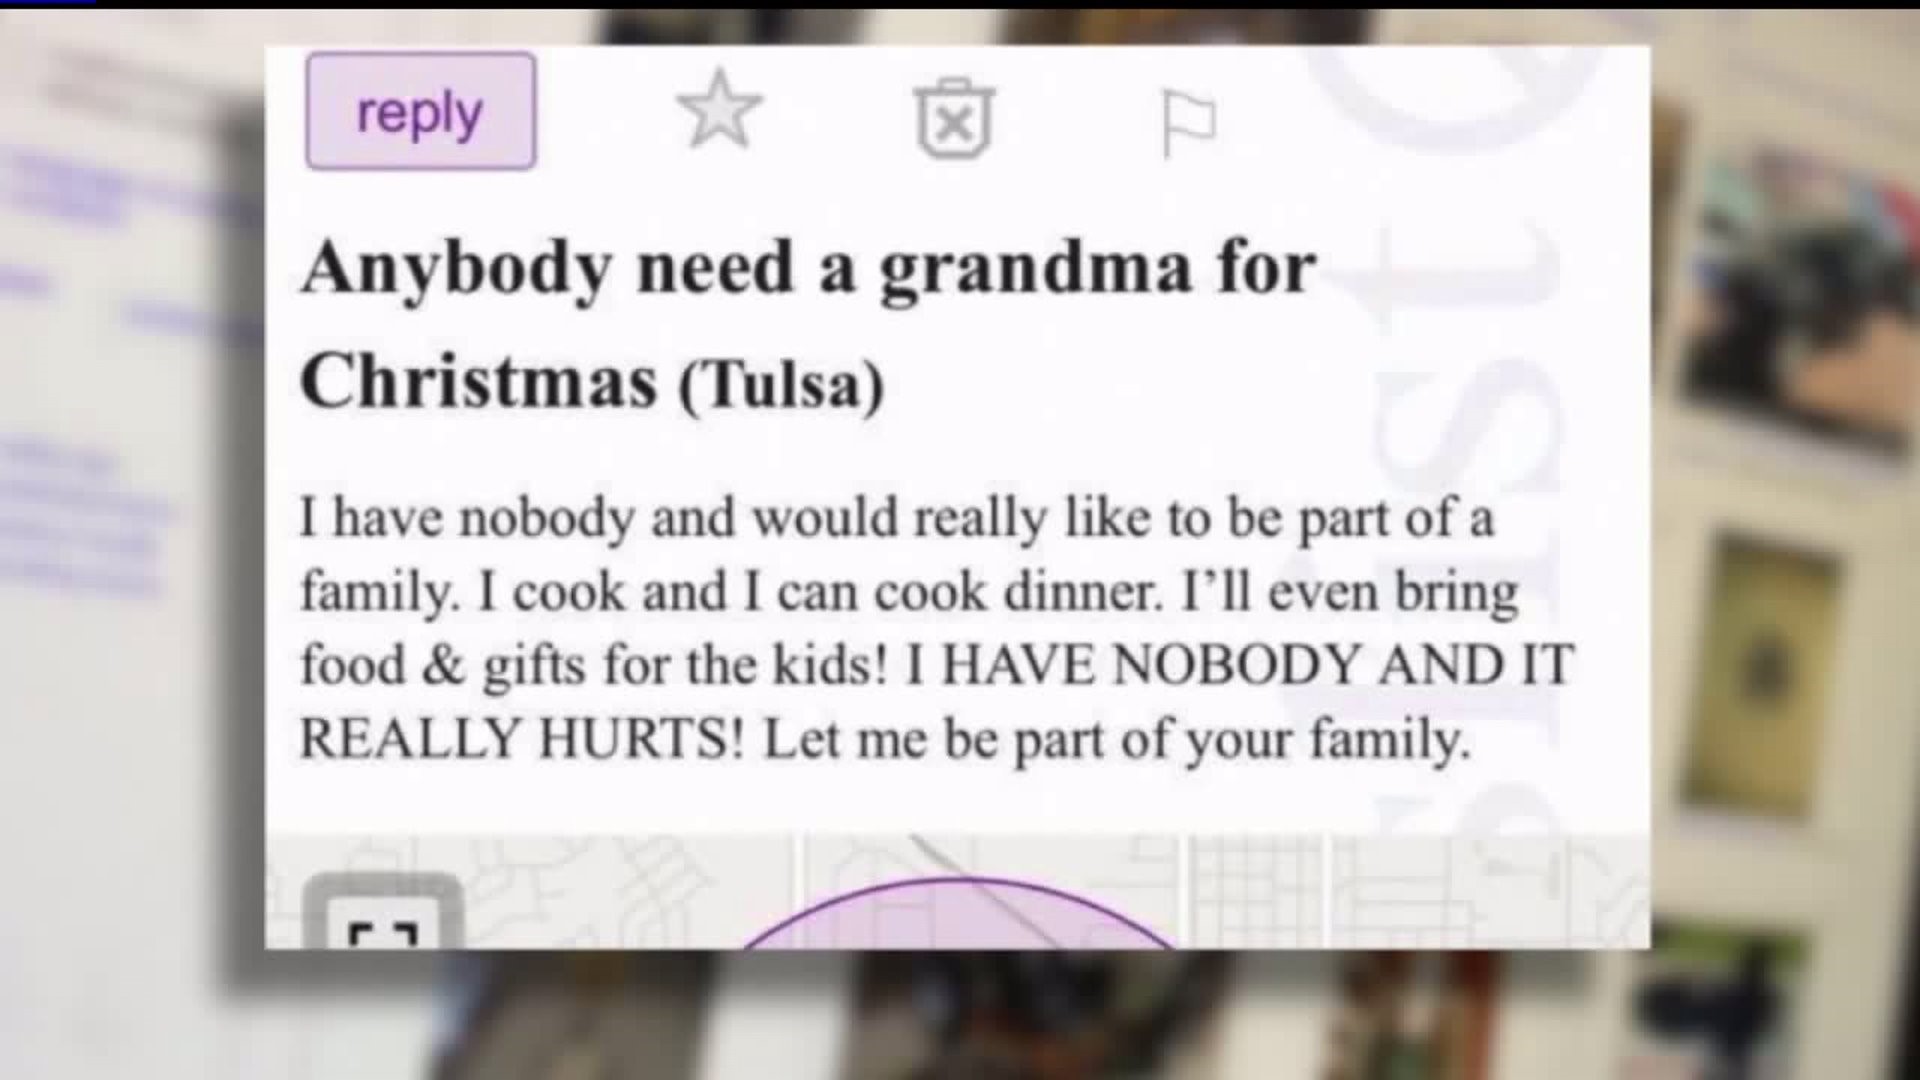 "Grandma" in need of family for Christmas Craigslist ad